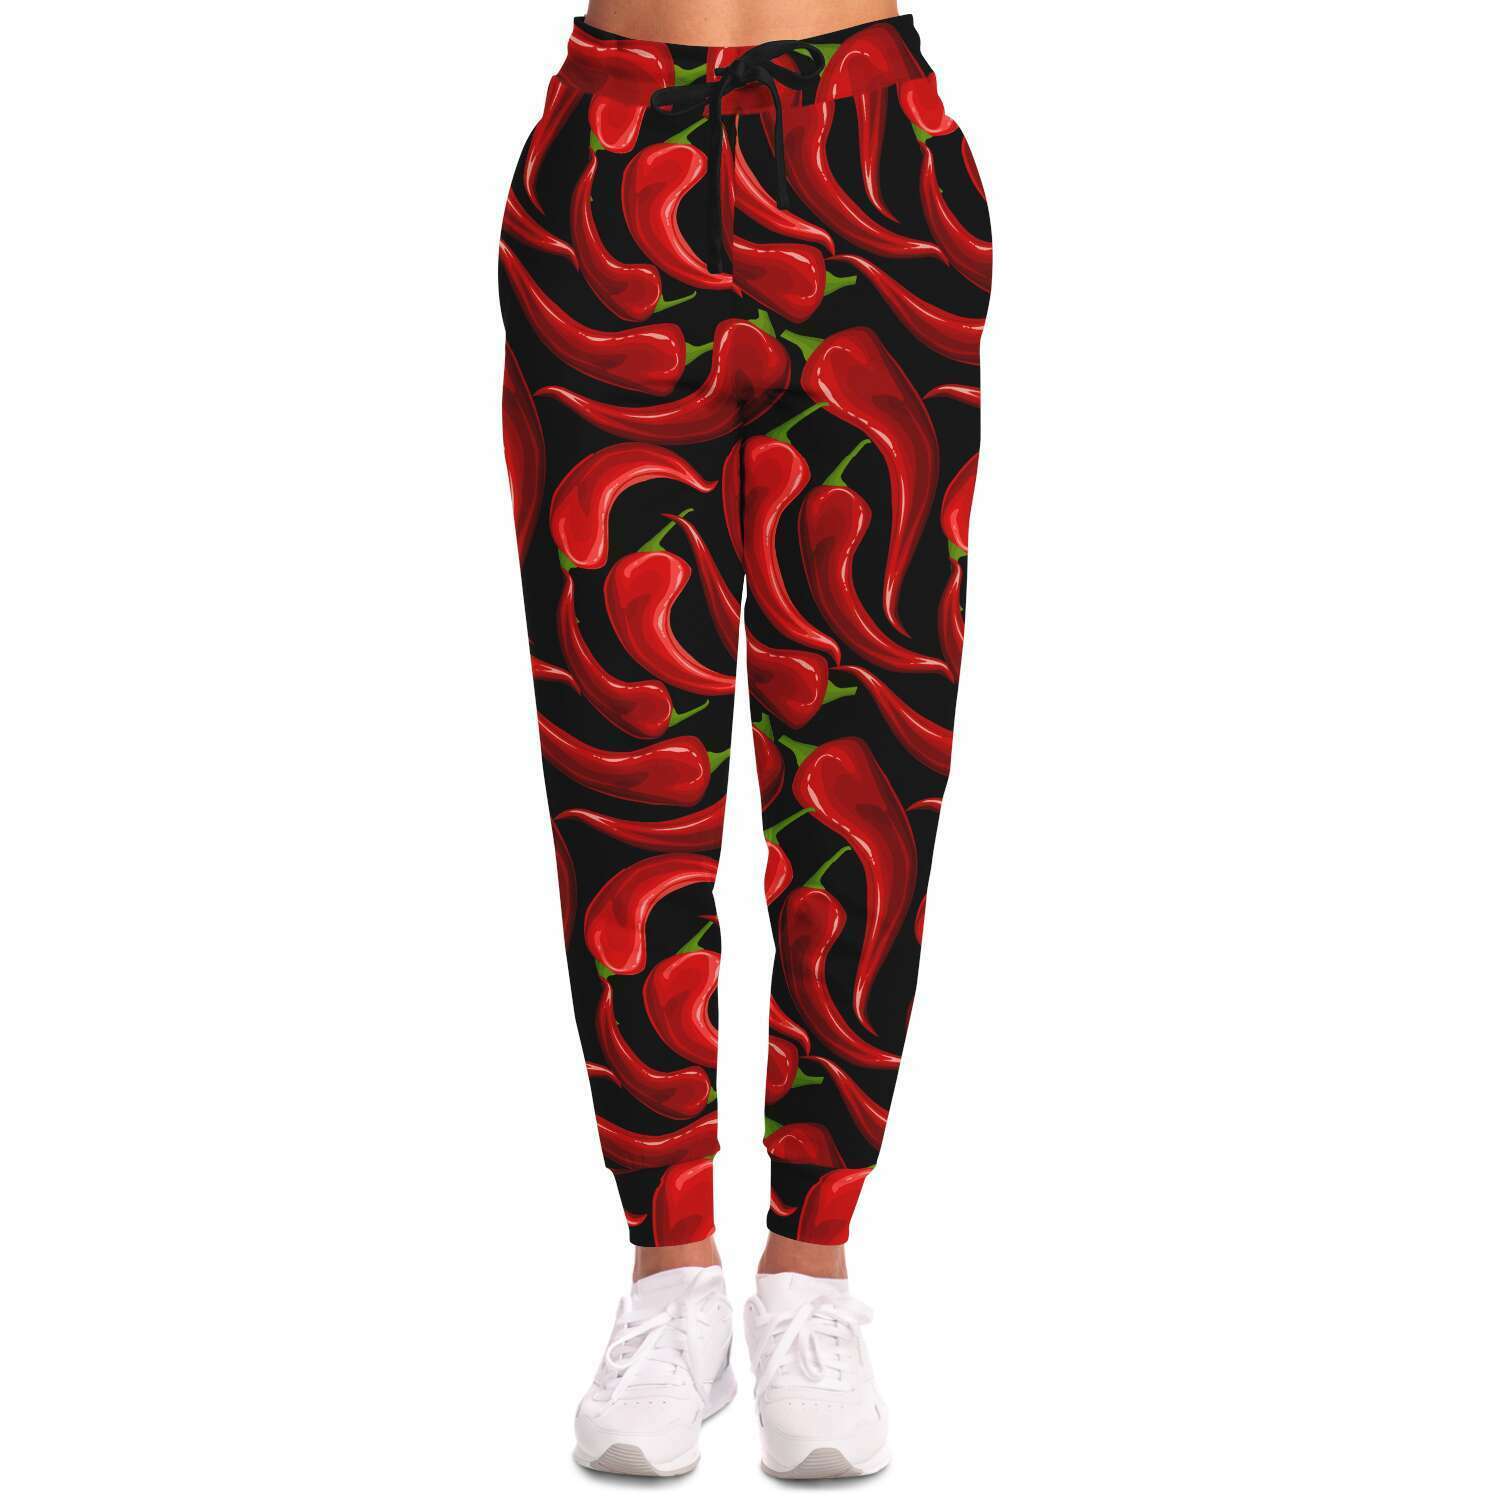 Chili Peppers Joggers